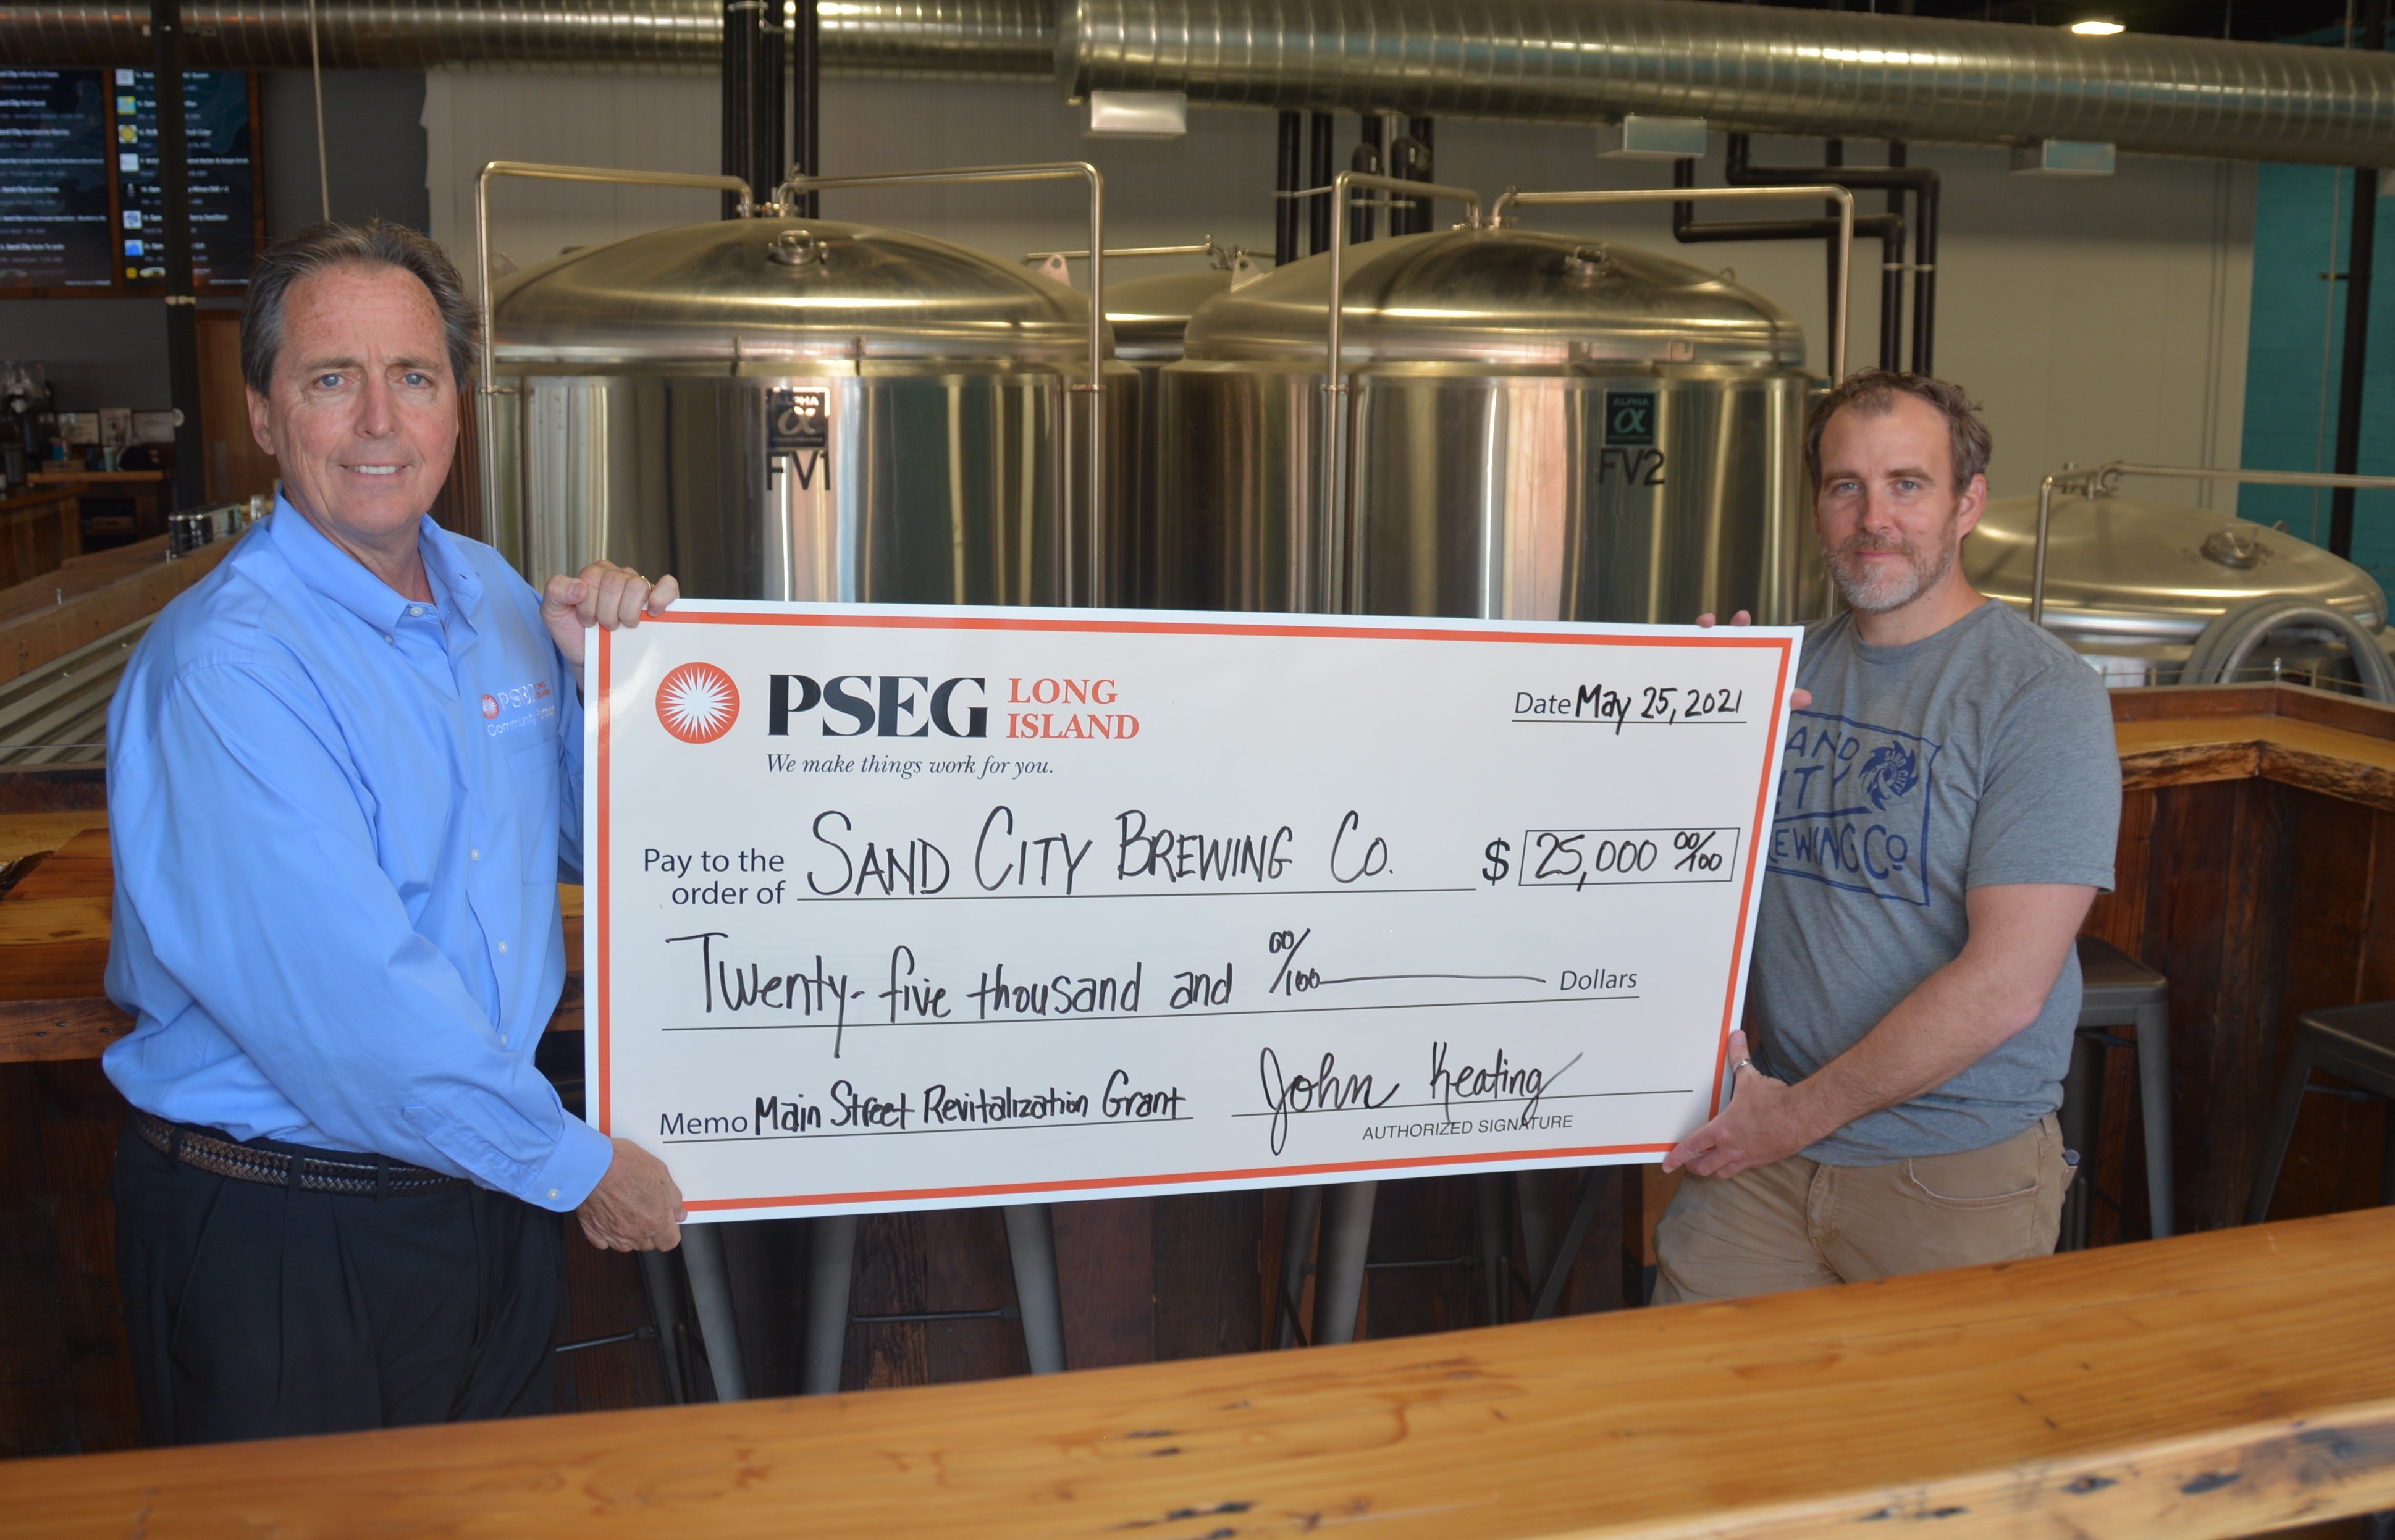 Pictured from left to right are John Keating, manager of Economic Development at PSEG Long Island and Bill Kiernan, co-owner of Sand City Brewing Co.  